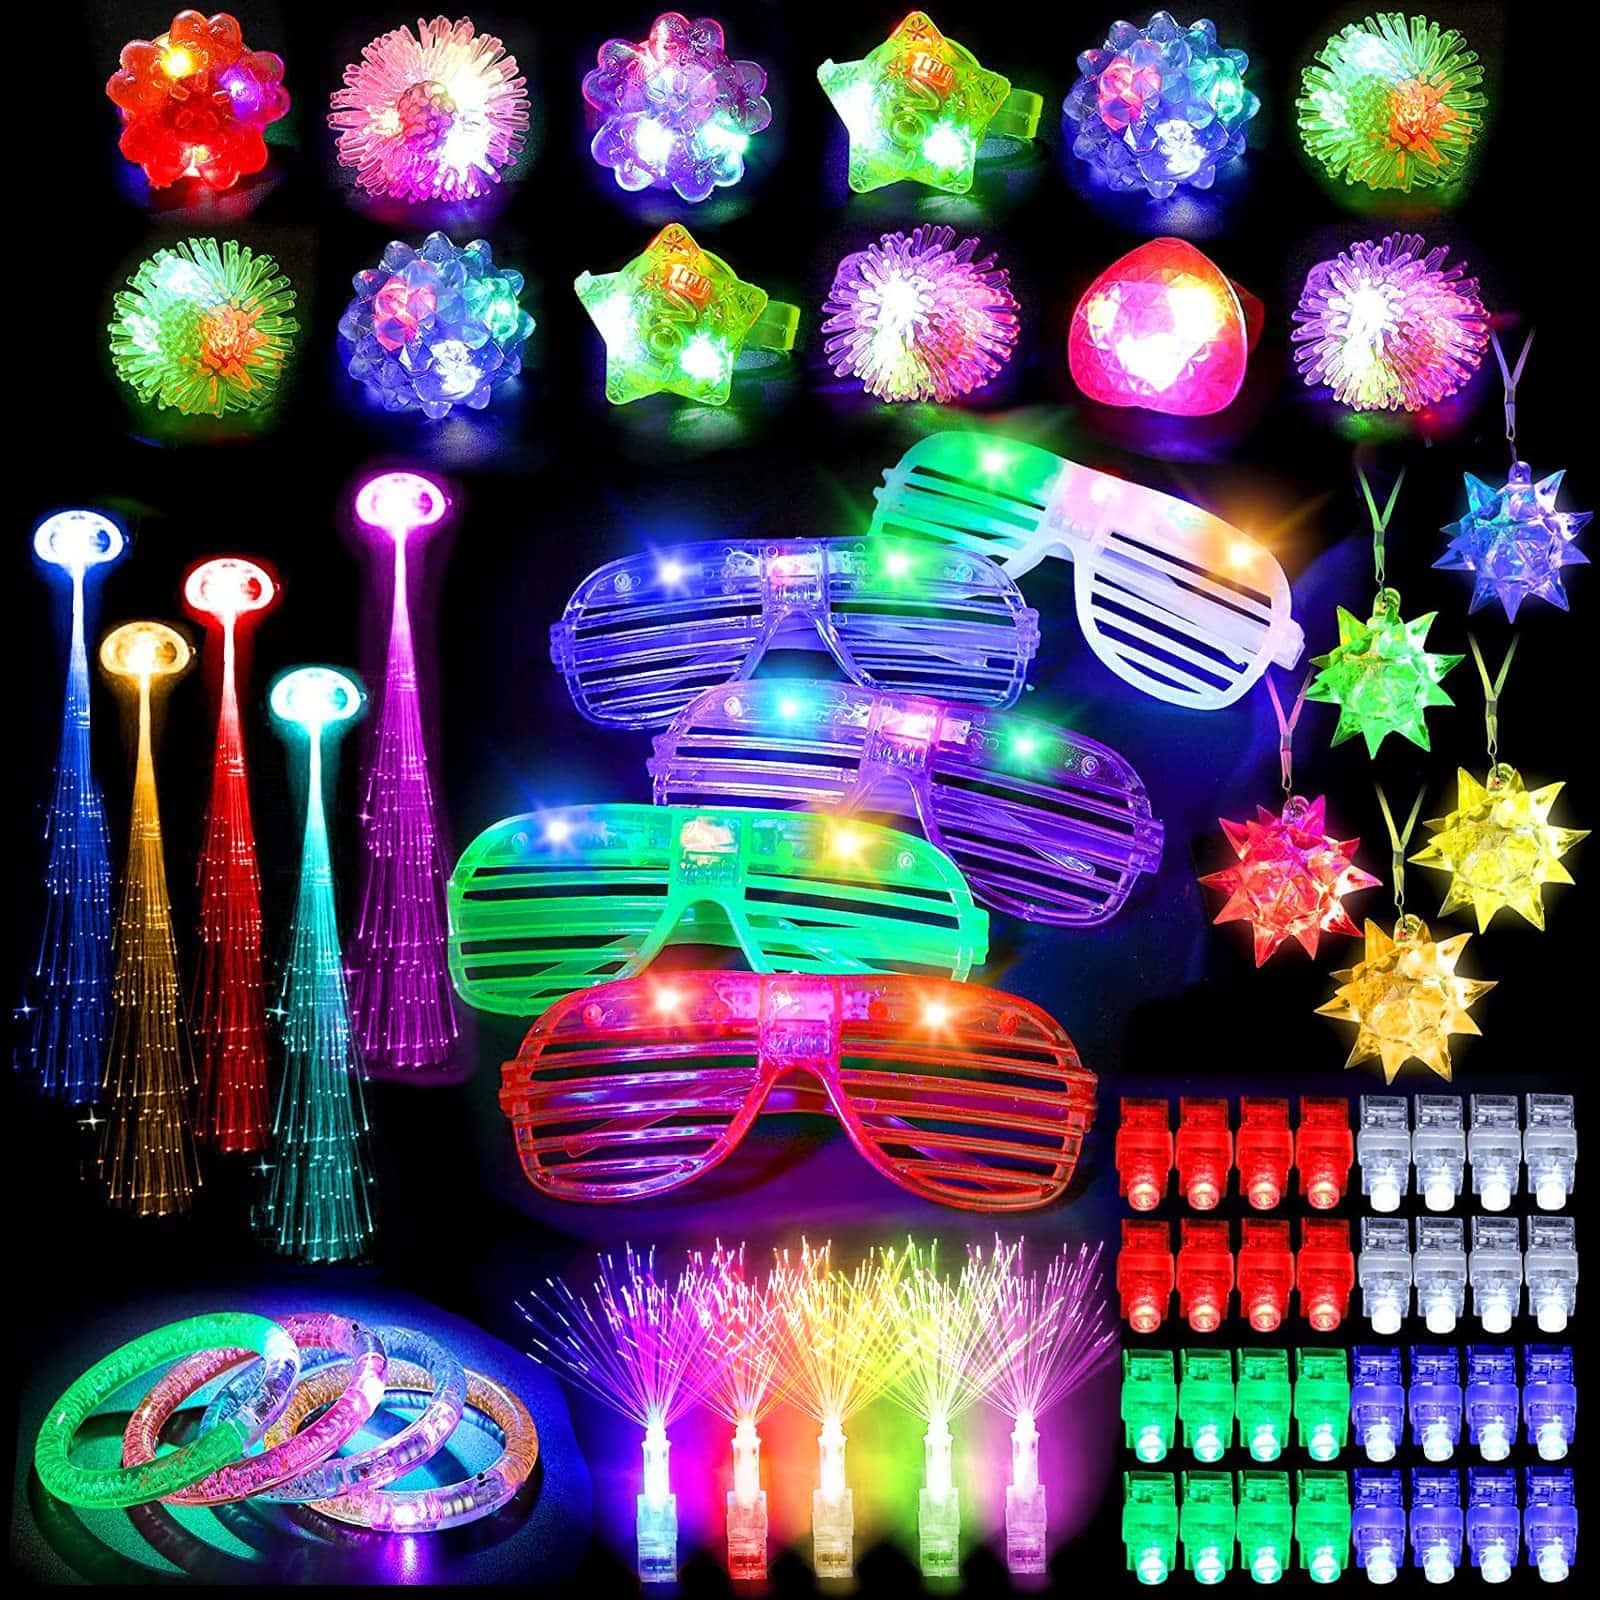 Max Fun Led Light Up Glasses Toys Plastic Shutter Shades Glasses Flashing  Glow in The Dark Sticks Sunglasses Party Supplies